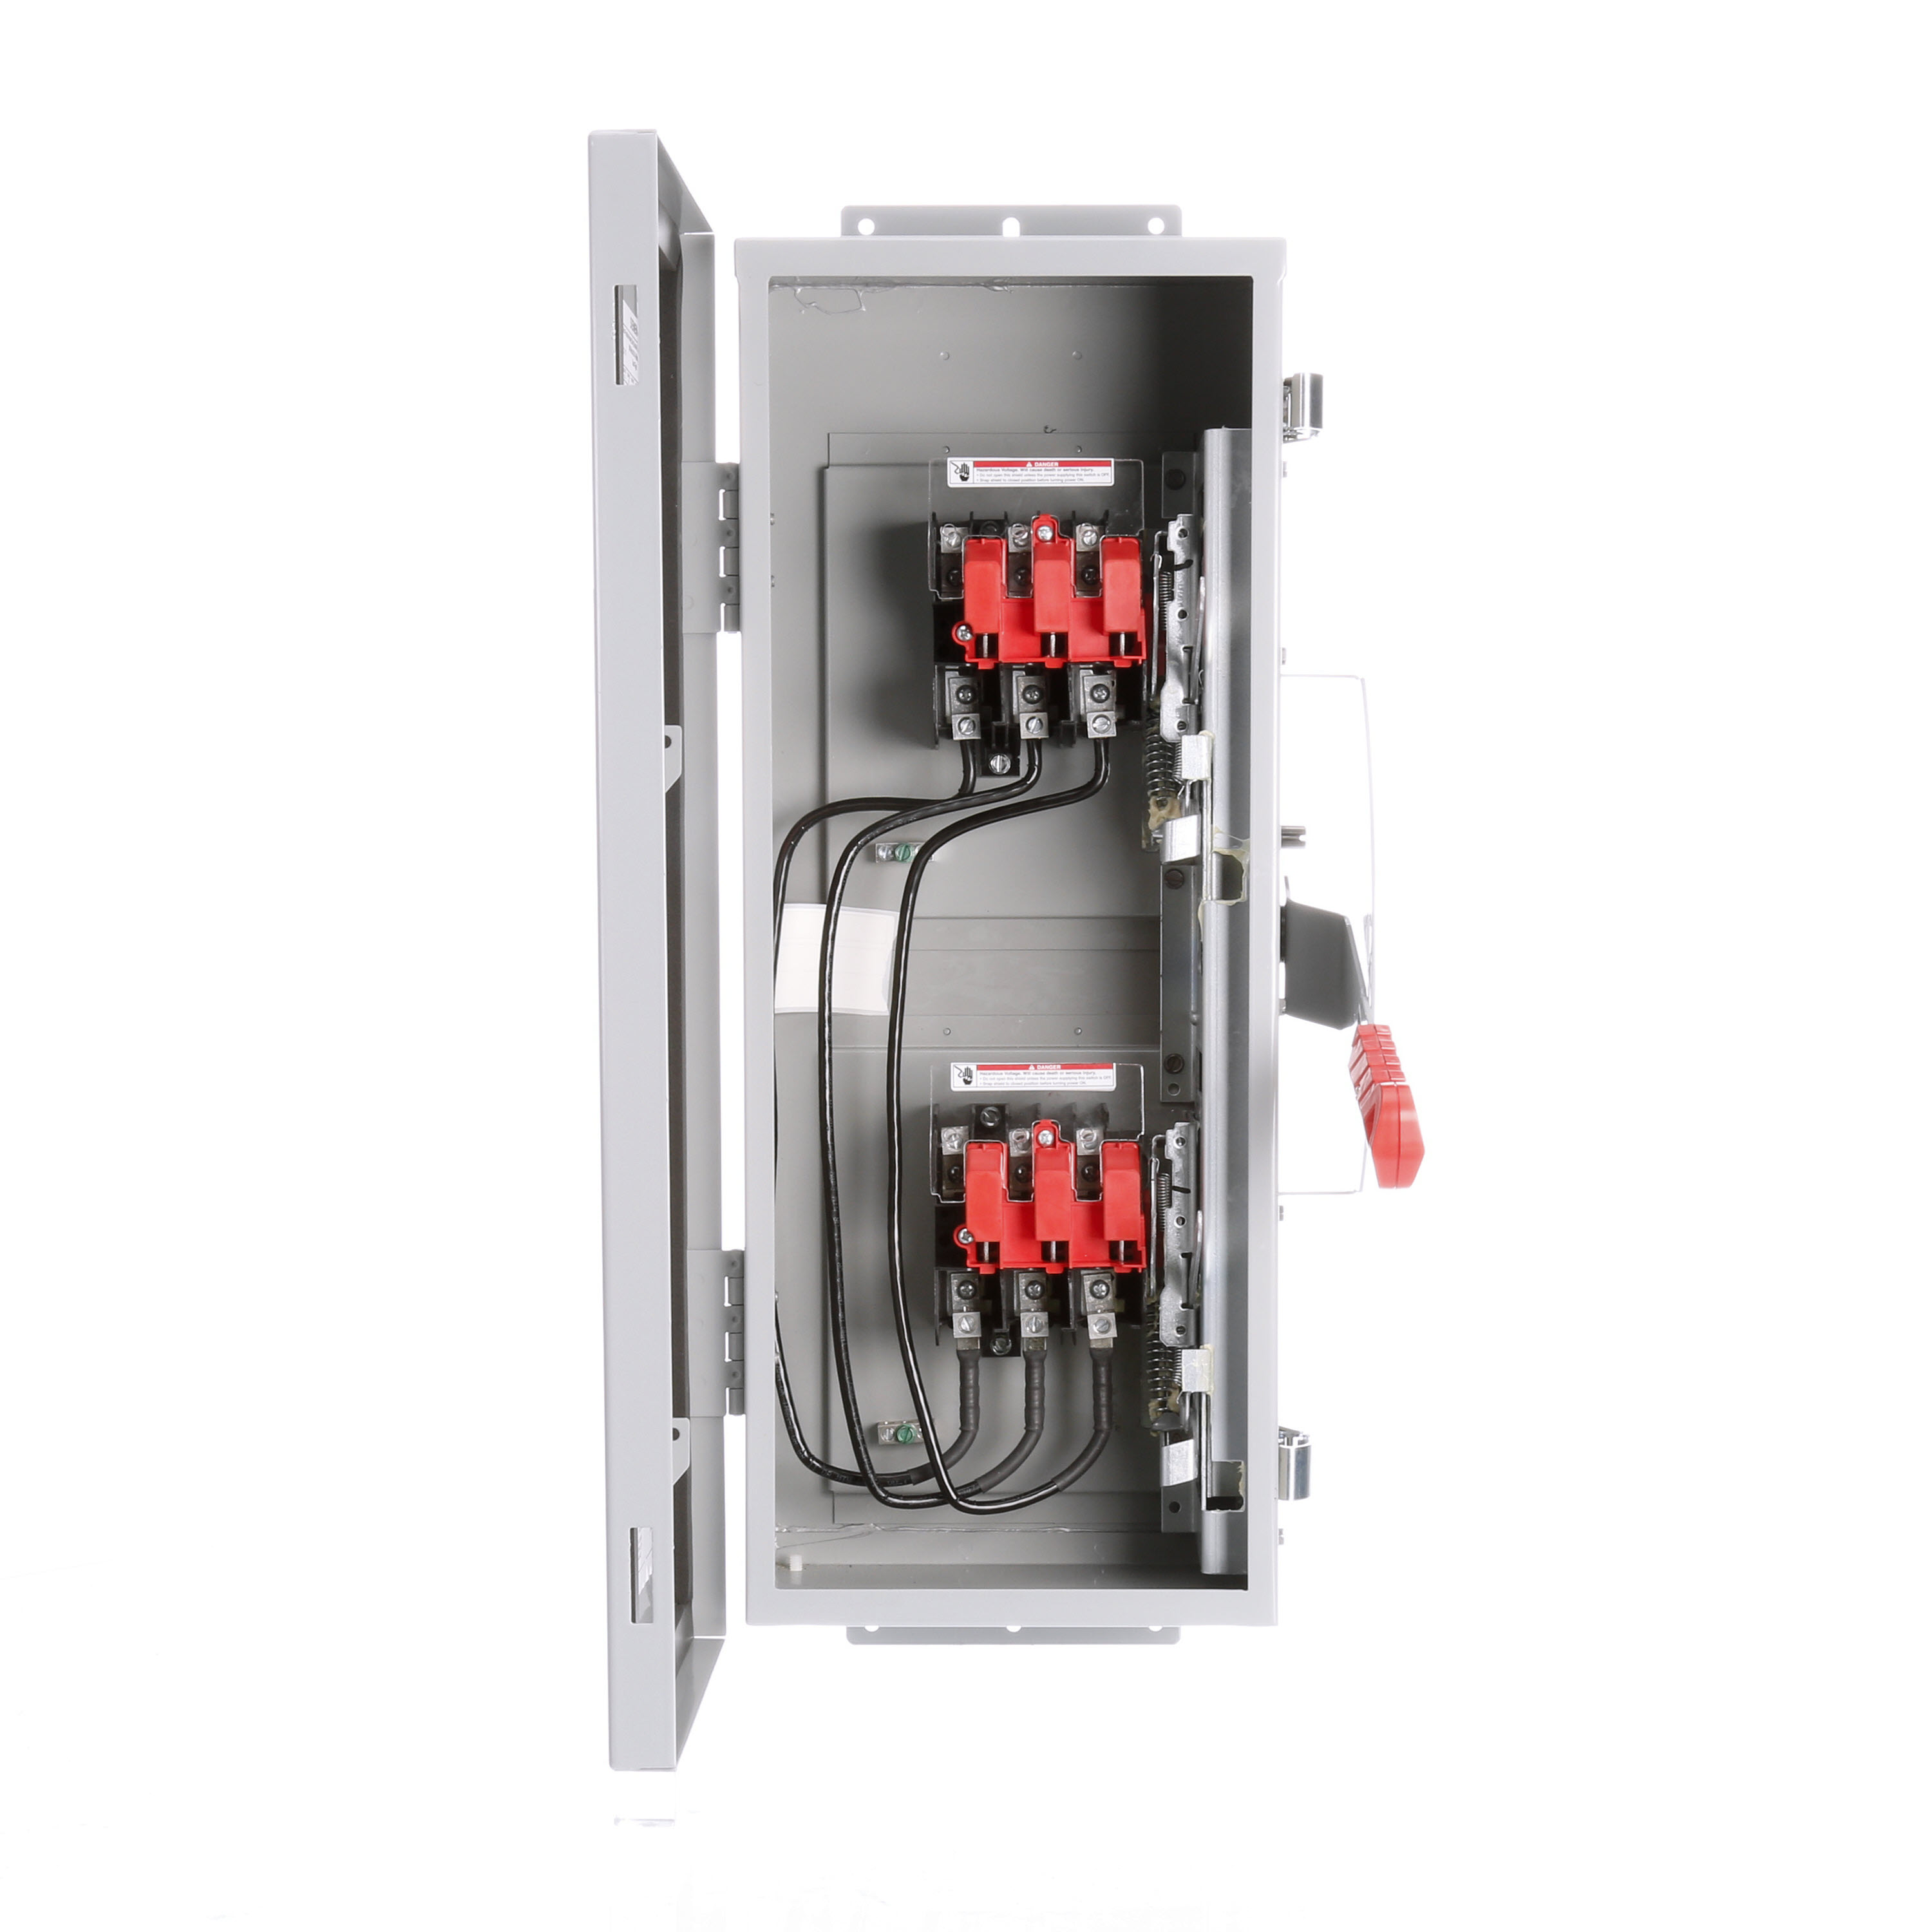 Siemens Low Voltage Circuit Protection Heavy Duty Safety Switches. Type ENCLOSED, SAFETY SWITCH Std UL V. Rating 600V A. Rating 30A Wattage 3W No. Of Poles 3P F. Rating 60Hz Action DOUBLE THROW Material 304SS Enclosure TYPE 12. 2-3 point mounting holes. Insulation YES O. Cycles 10000 O. Temperature (-20F-120F) AMBIENTTEMPERATURE Environmental Conditions INDUSTRIAL